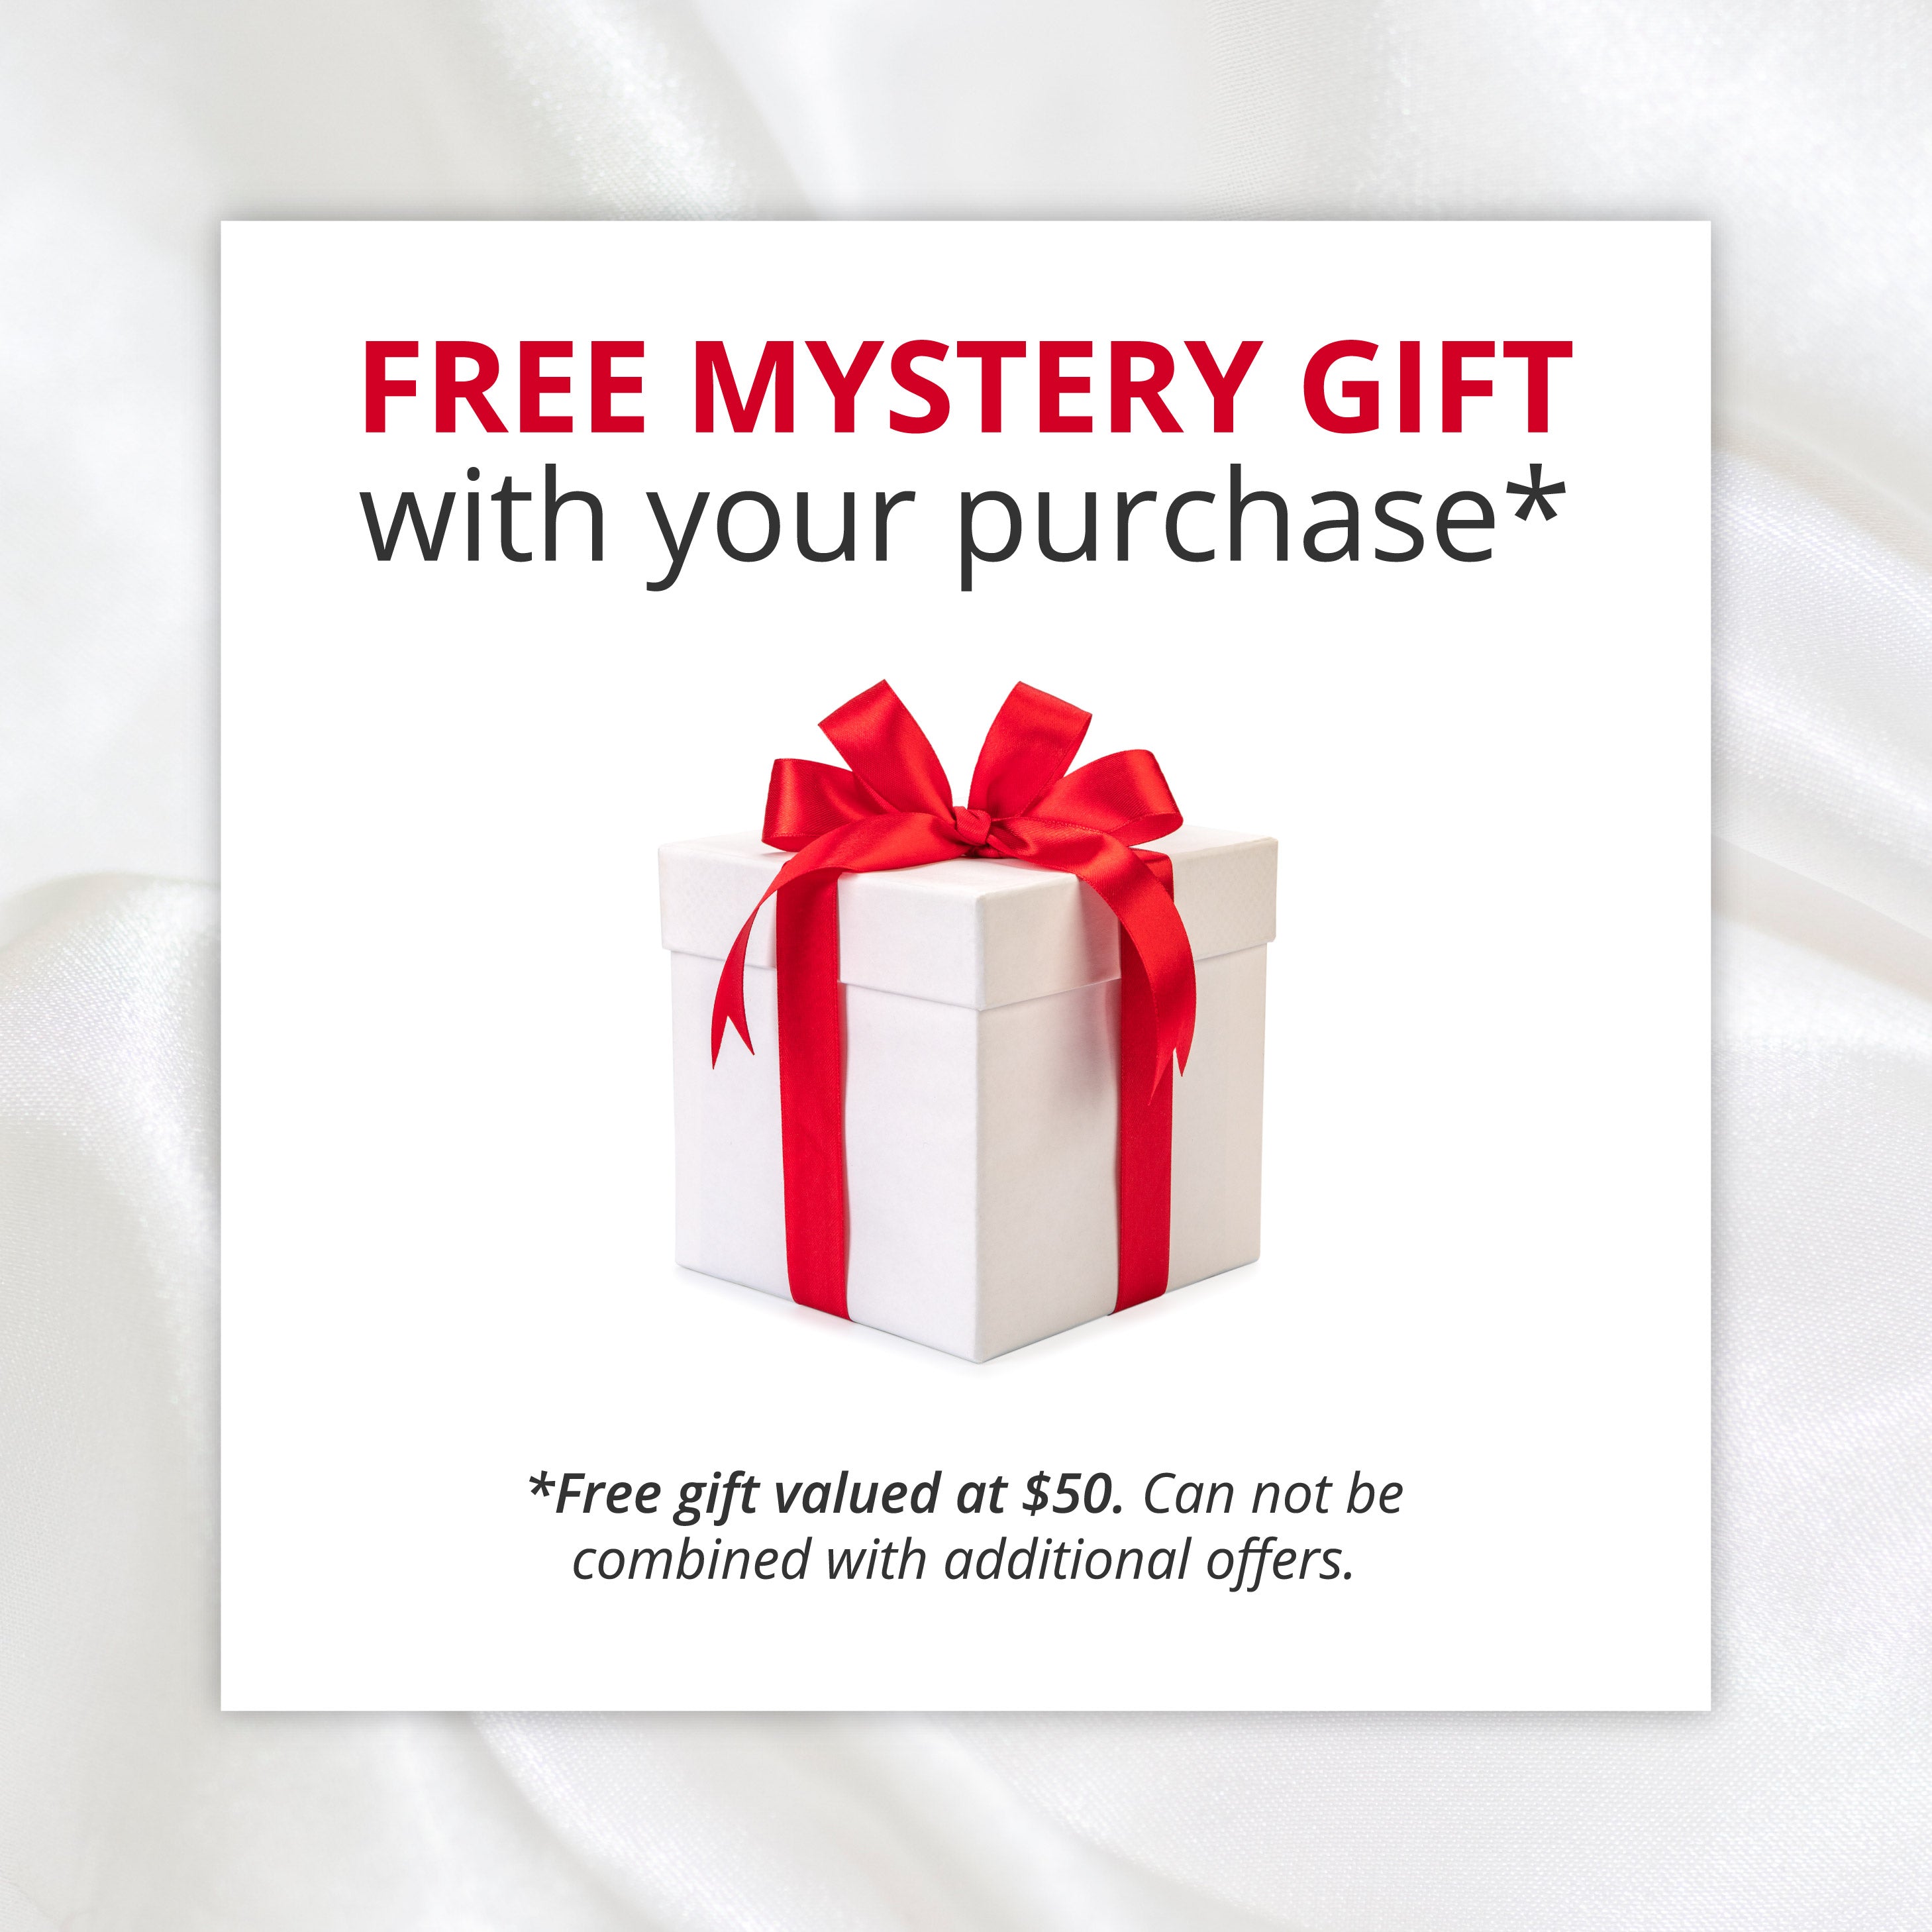 FREE GIFT from Jesus! – michealspencer